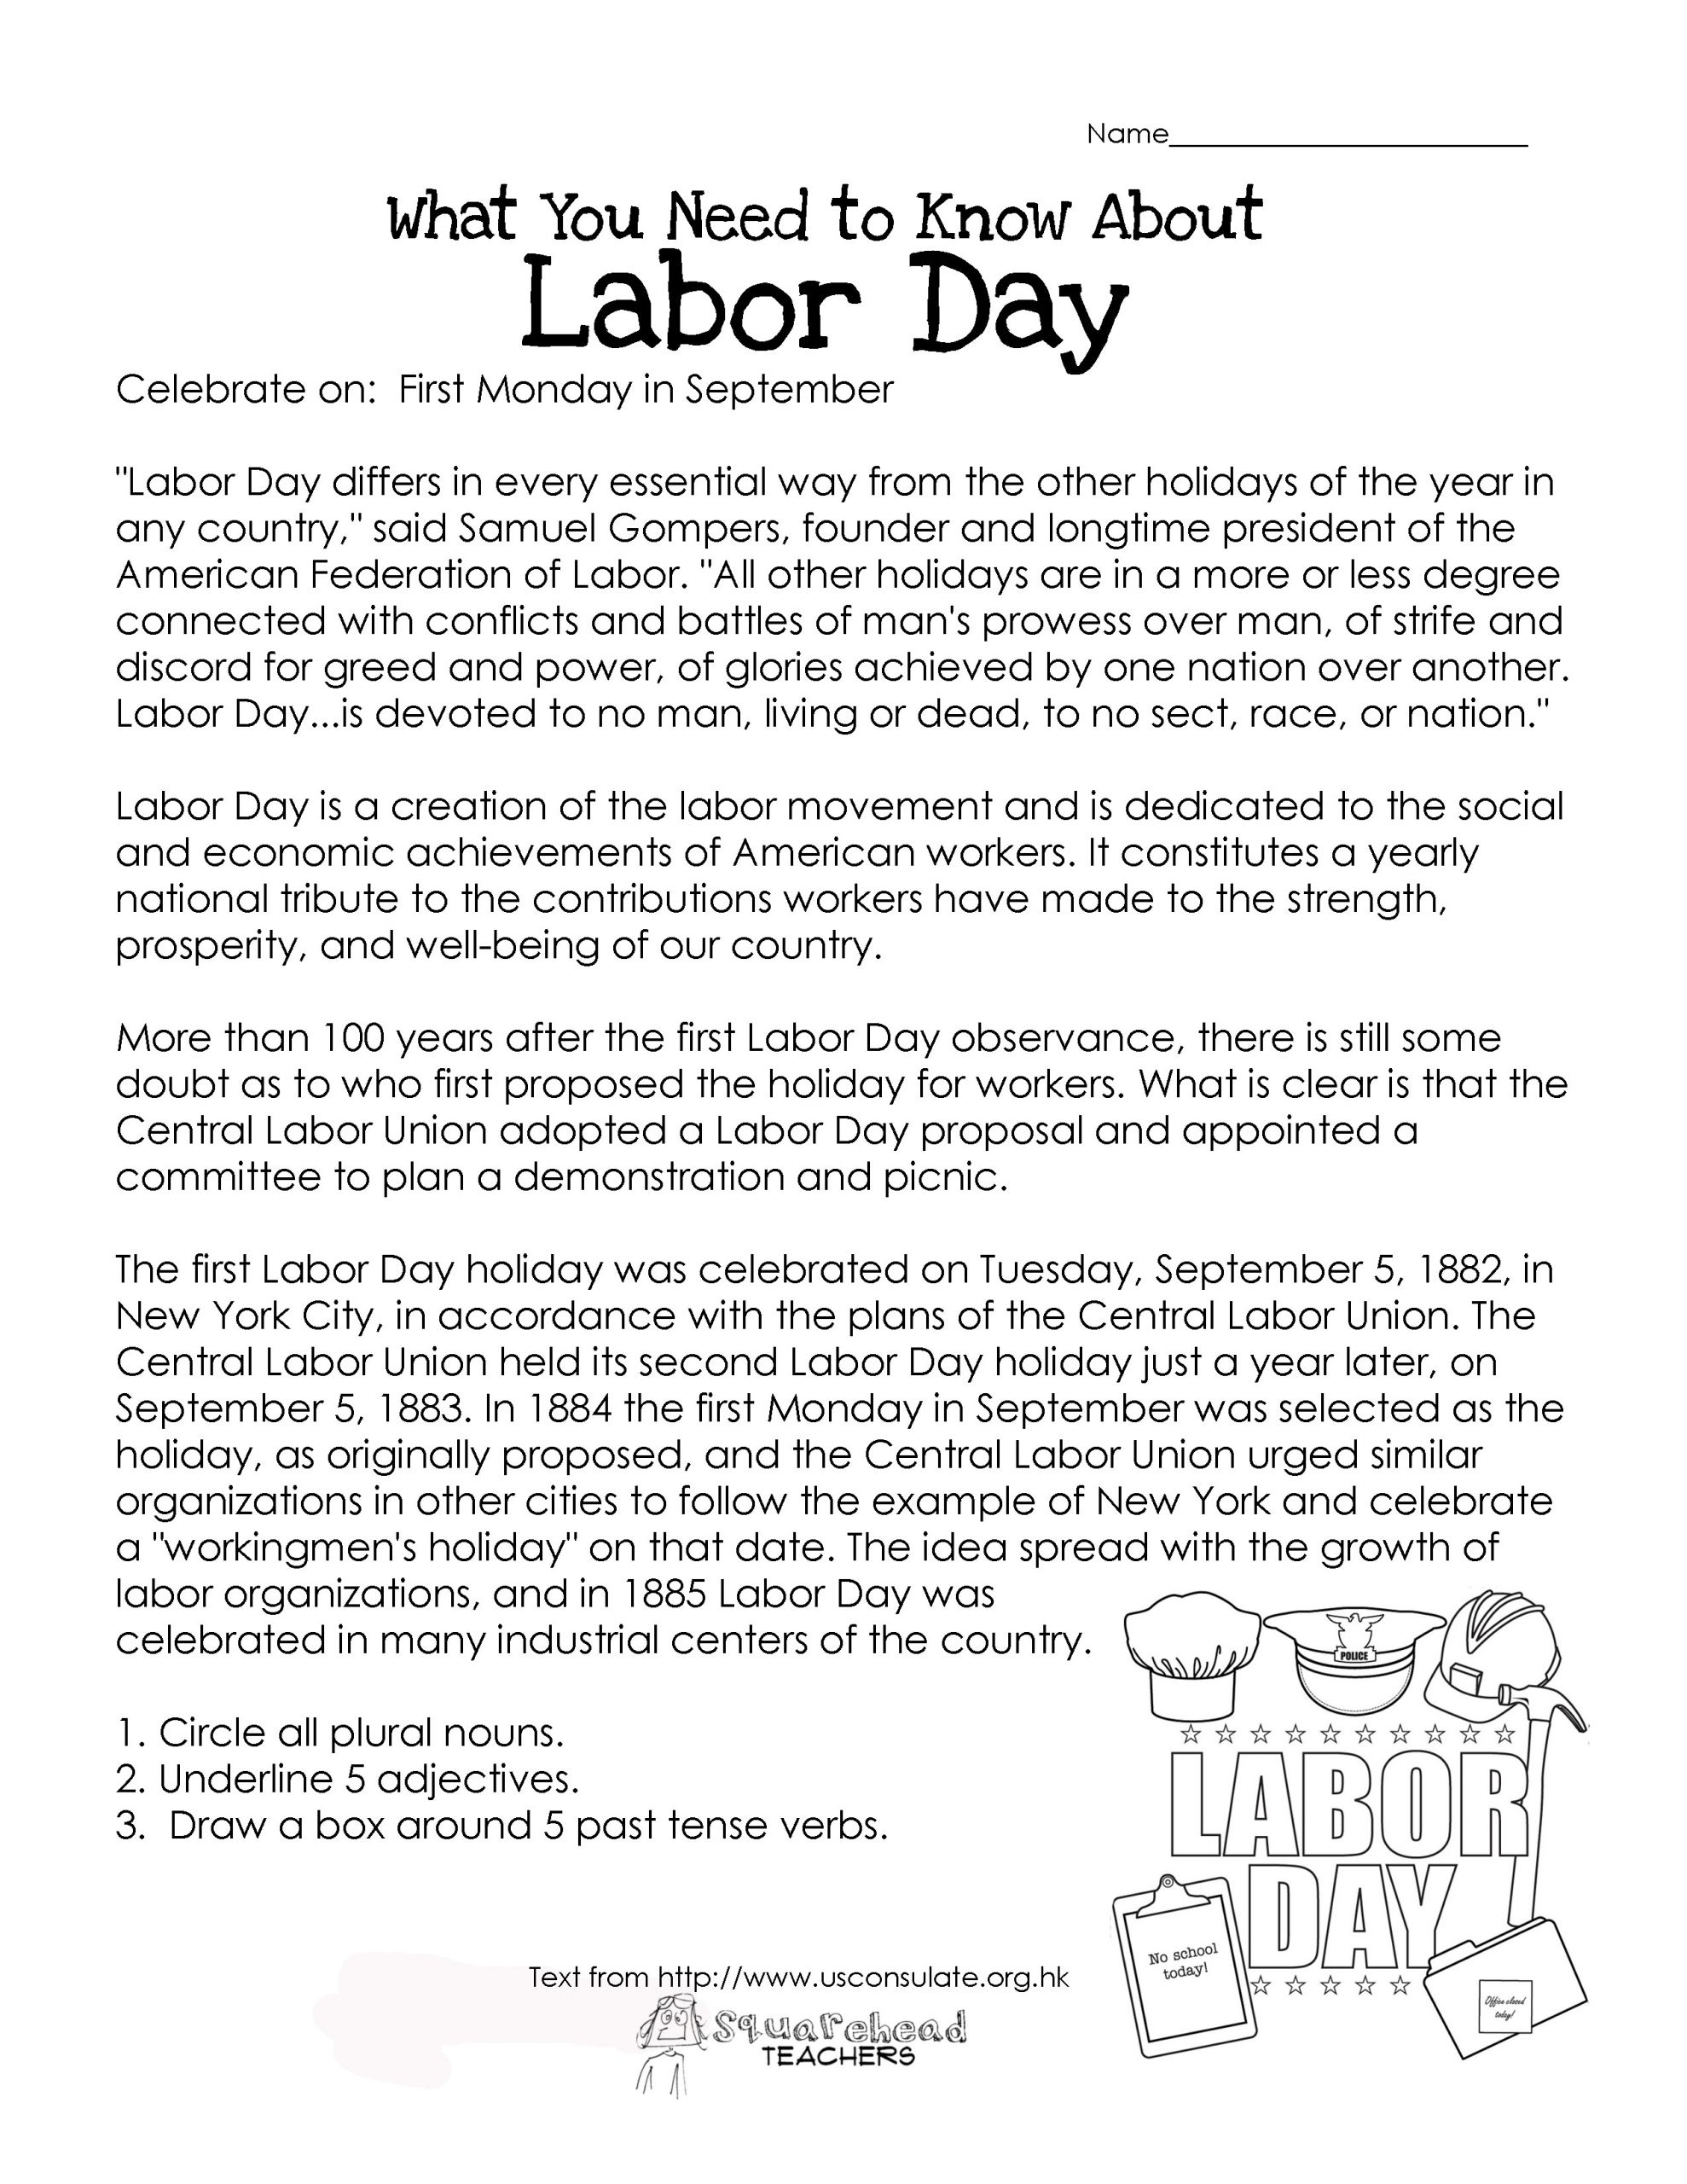 Labor Day Activities For Kids
 Labor Day What You Need to Know free worksheet